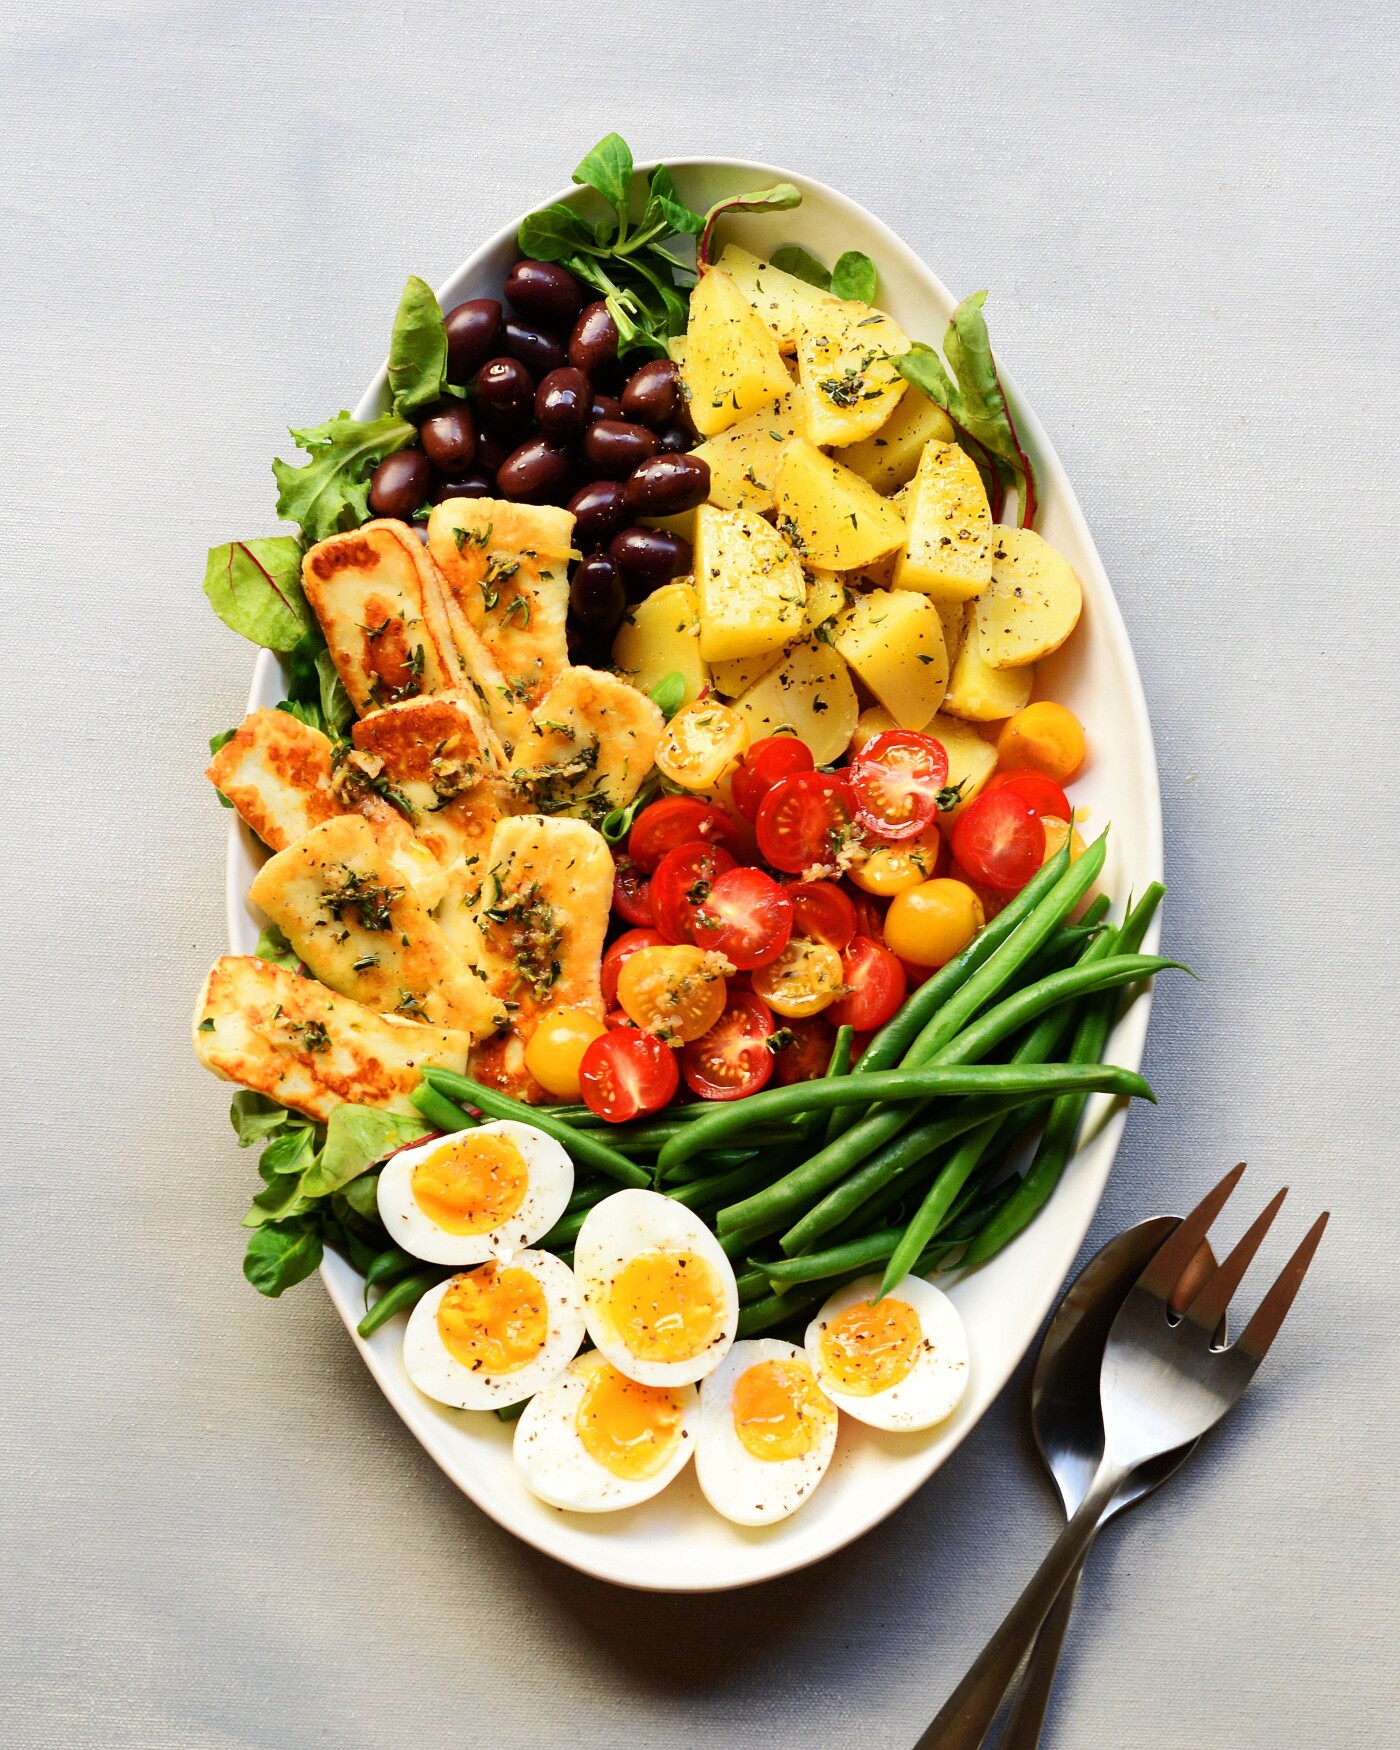 Nicoise salad is one of my favorite summer time meals that appears quite often on the dinner table.  This time I swapped traditional tuna with pan grilled Halloumi cheese.  It has an assemble of in season vegetables such as cherry tomatoes and haricot verts combined with kalamata olives, golden potatoes and 7 minute hard boiled eggs.  The finishing touch is an olive oil dressing whisked with garlic paste, savory herb and lemon juice.  